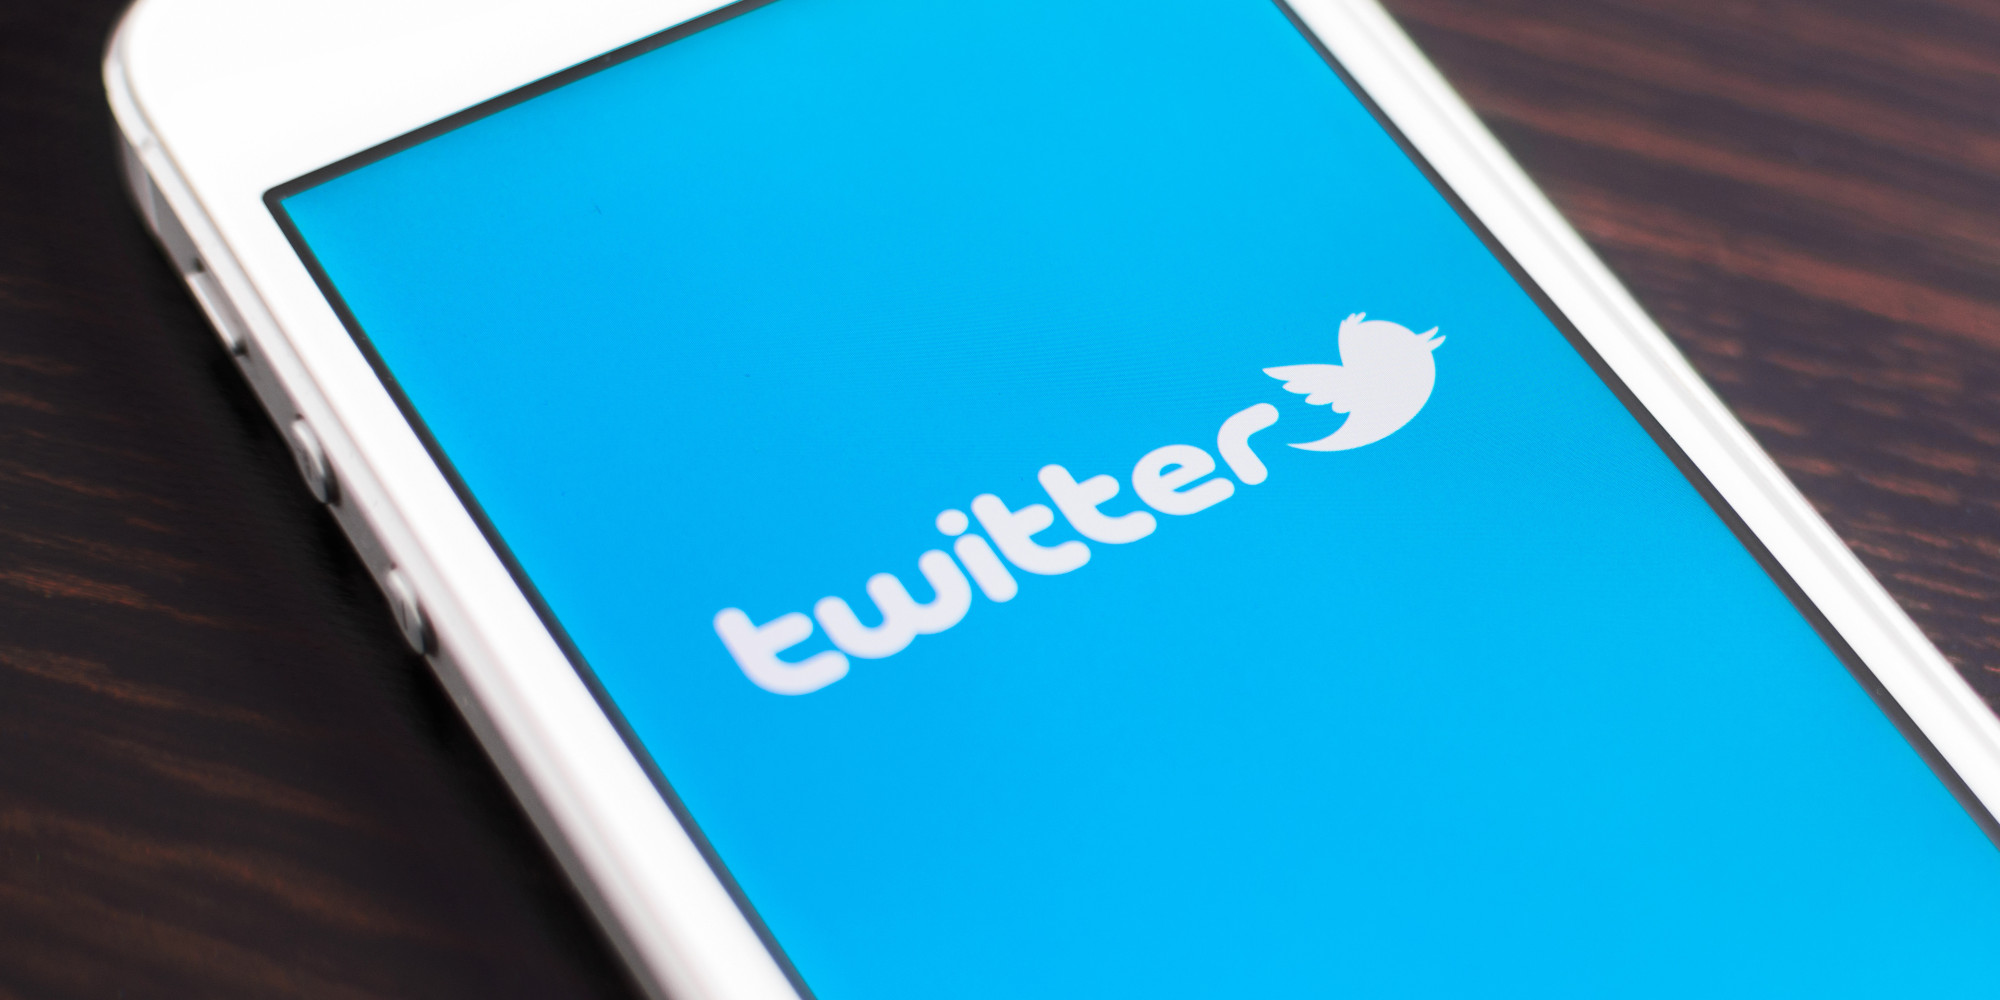 Twitter is working on a video sharing tool resembling Snapchat